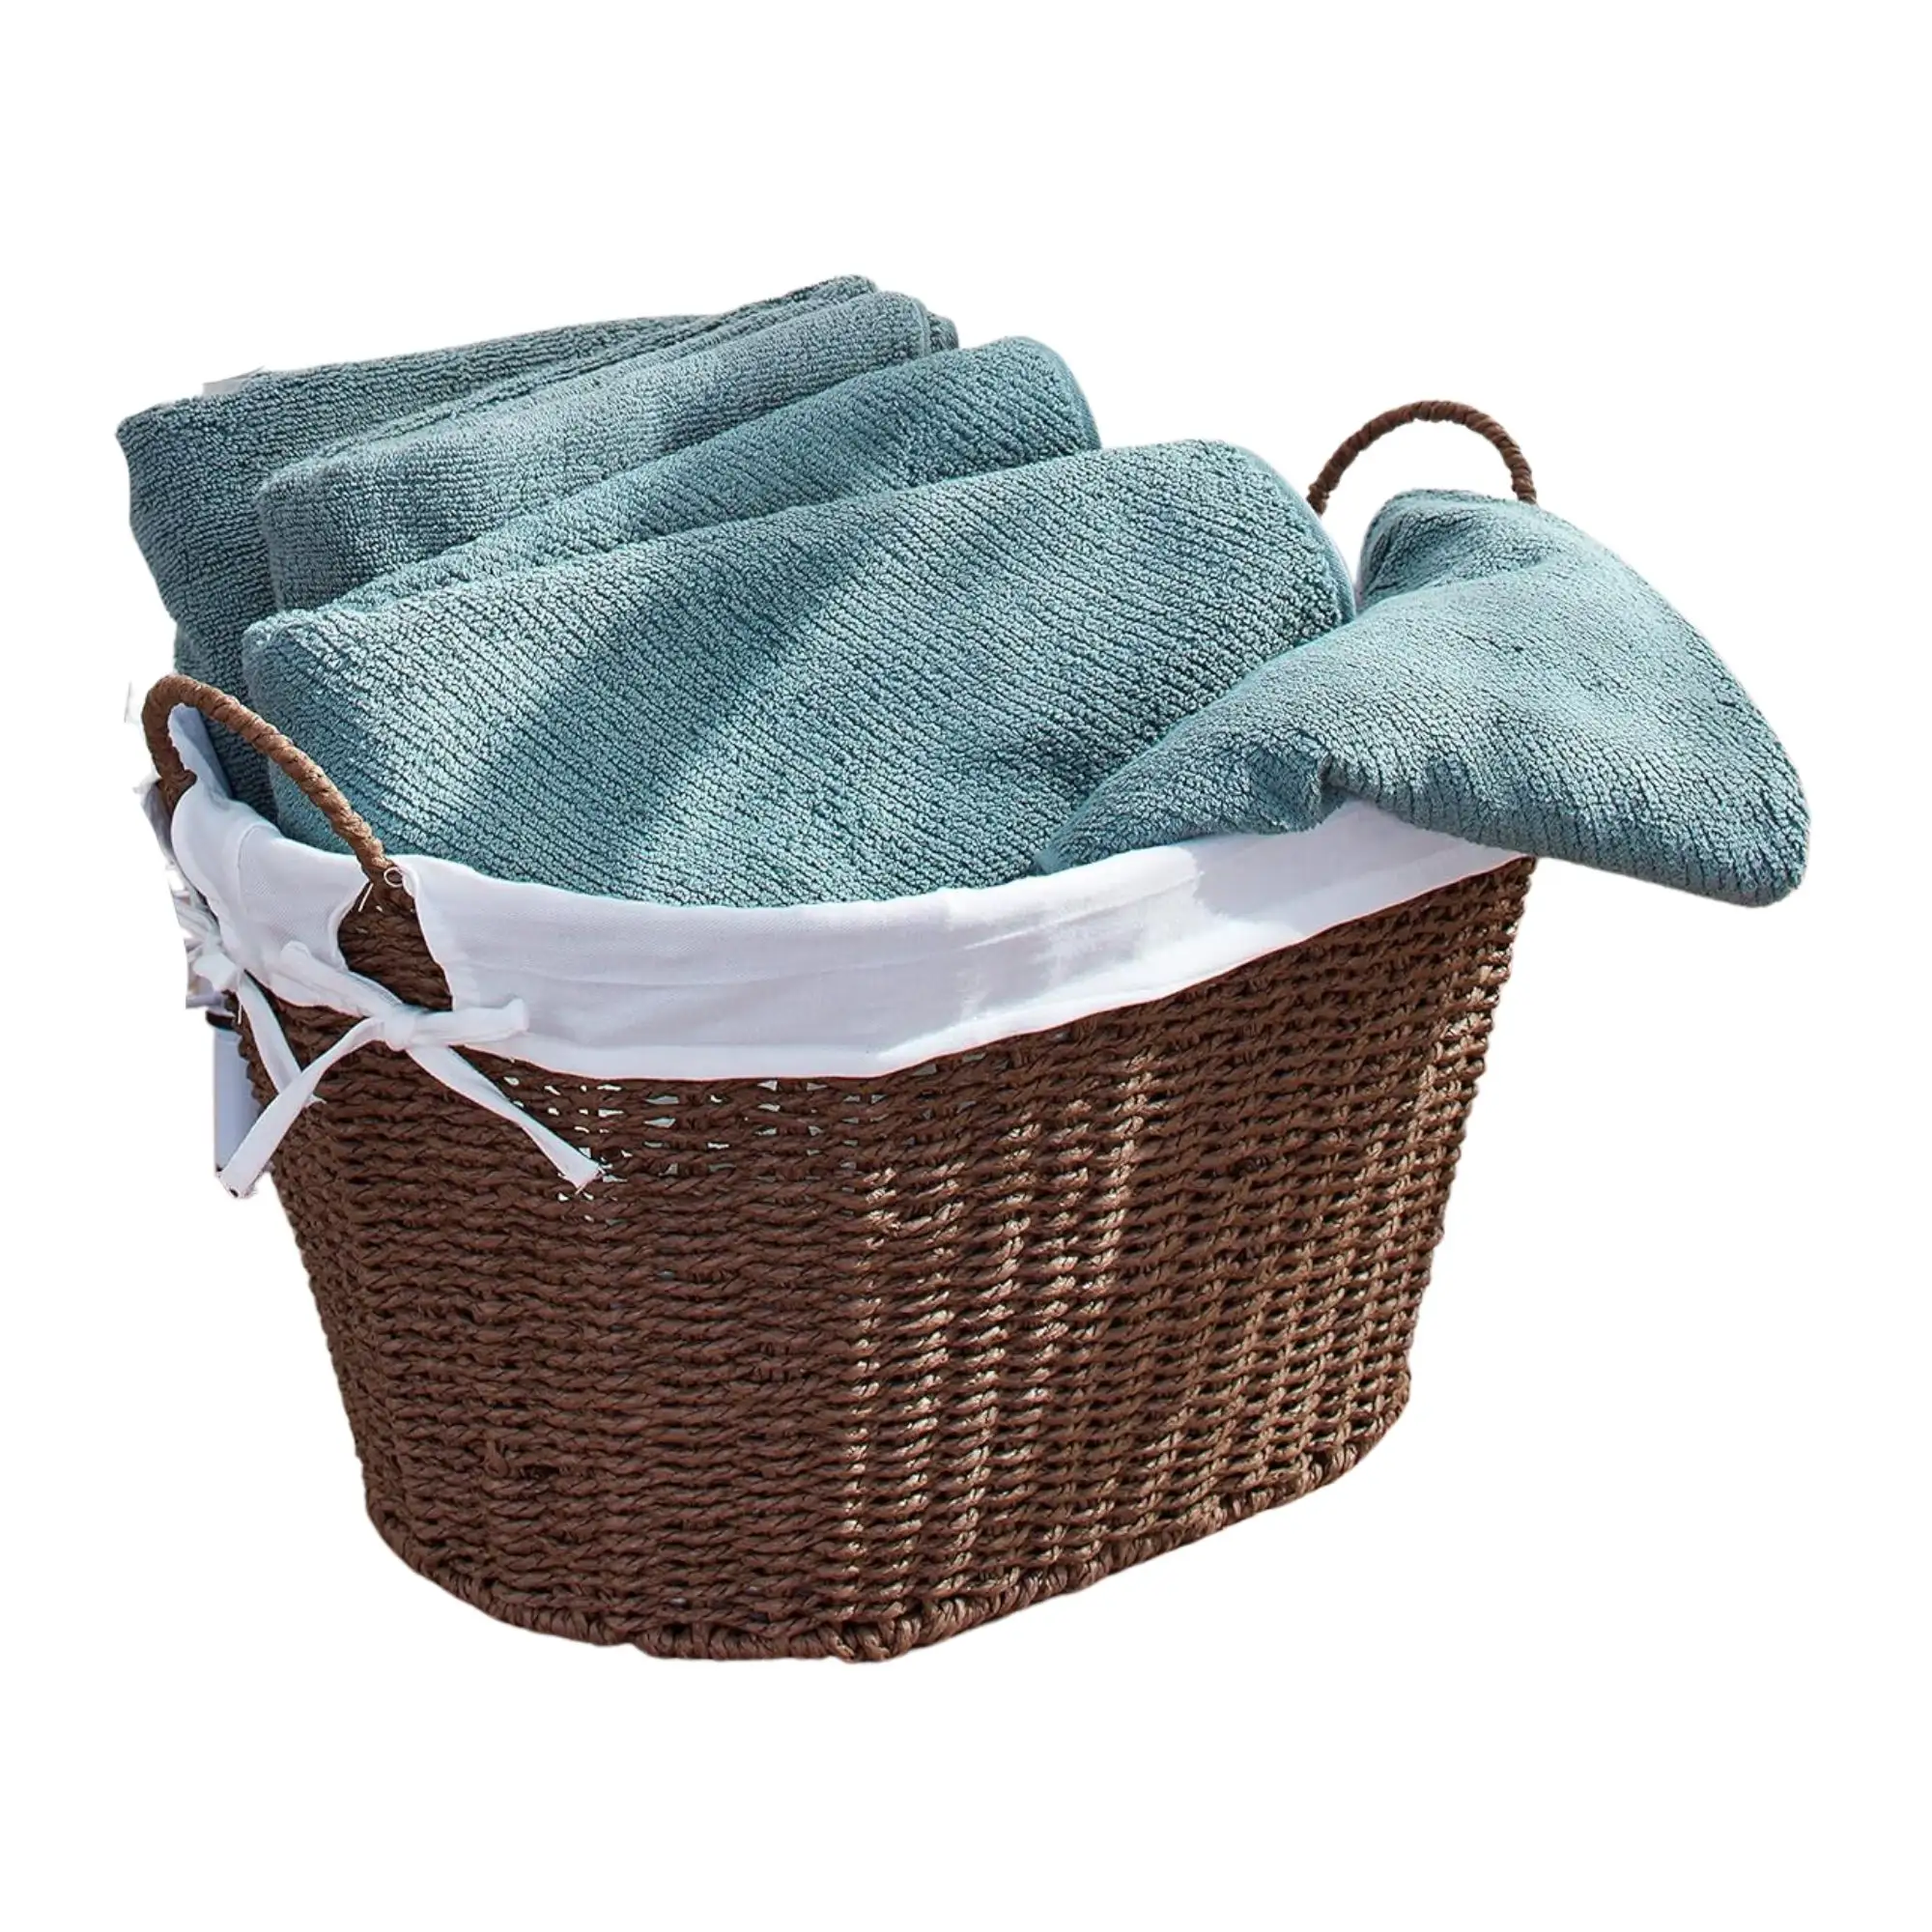 Wholesale factory Wicker Seagrass Laundry Basket Hamper with Handles and Removable Liner Handmade Seargass Basket for Storage